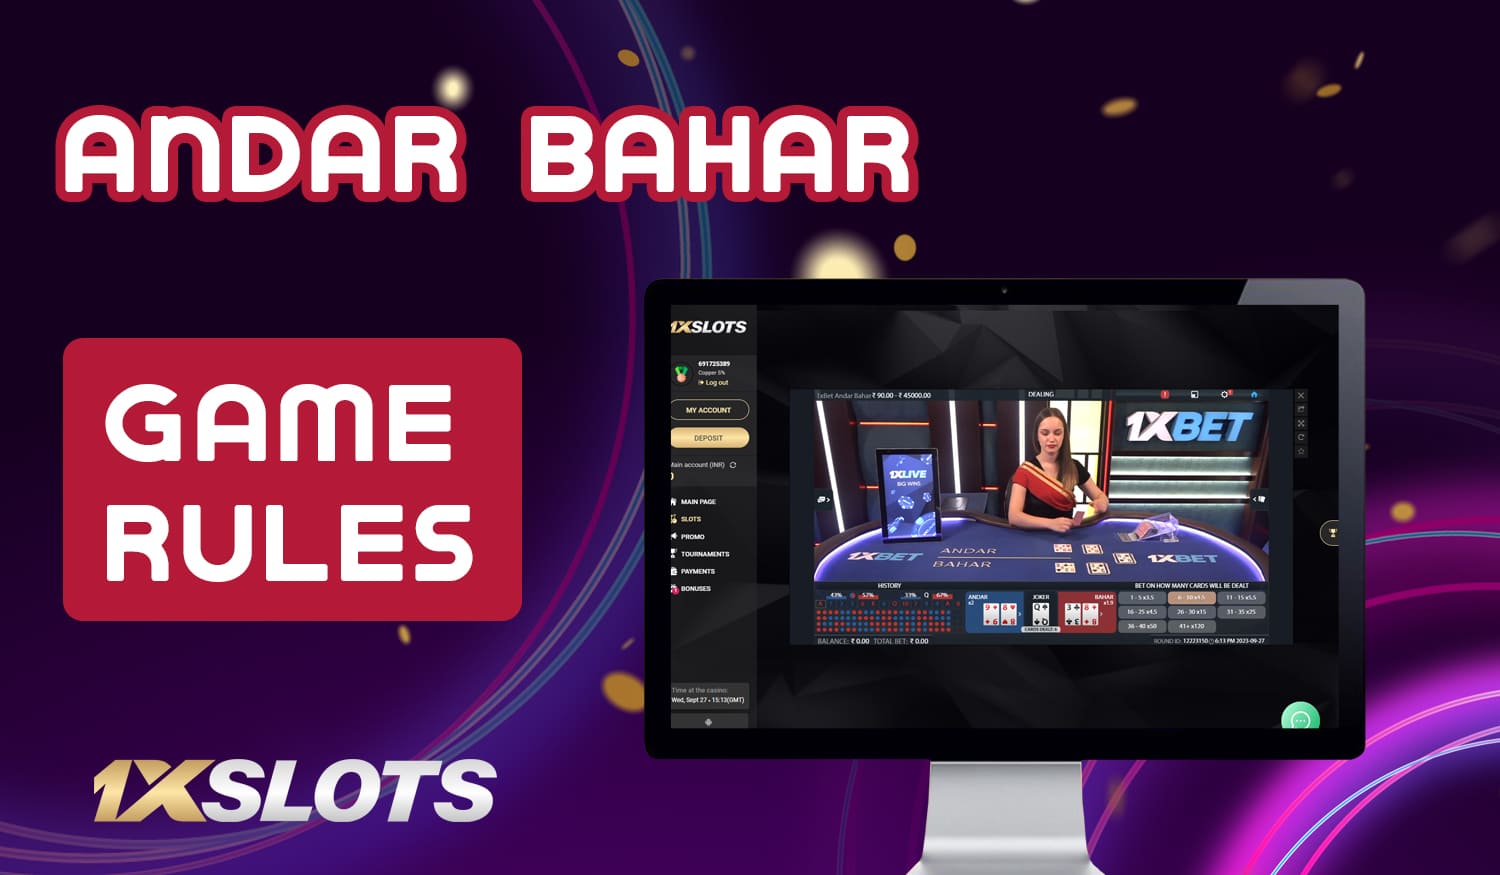 Andar bahar game rules: how 1Xslots users can get the biggest benefits